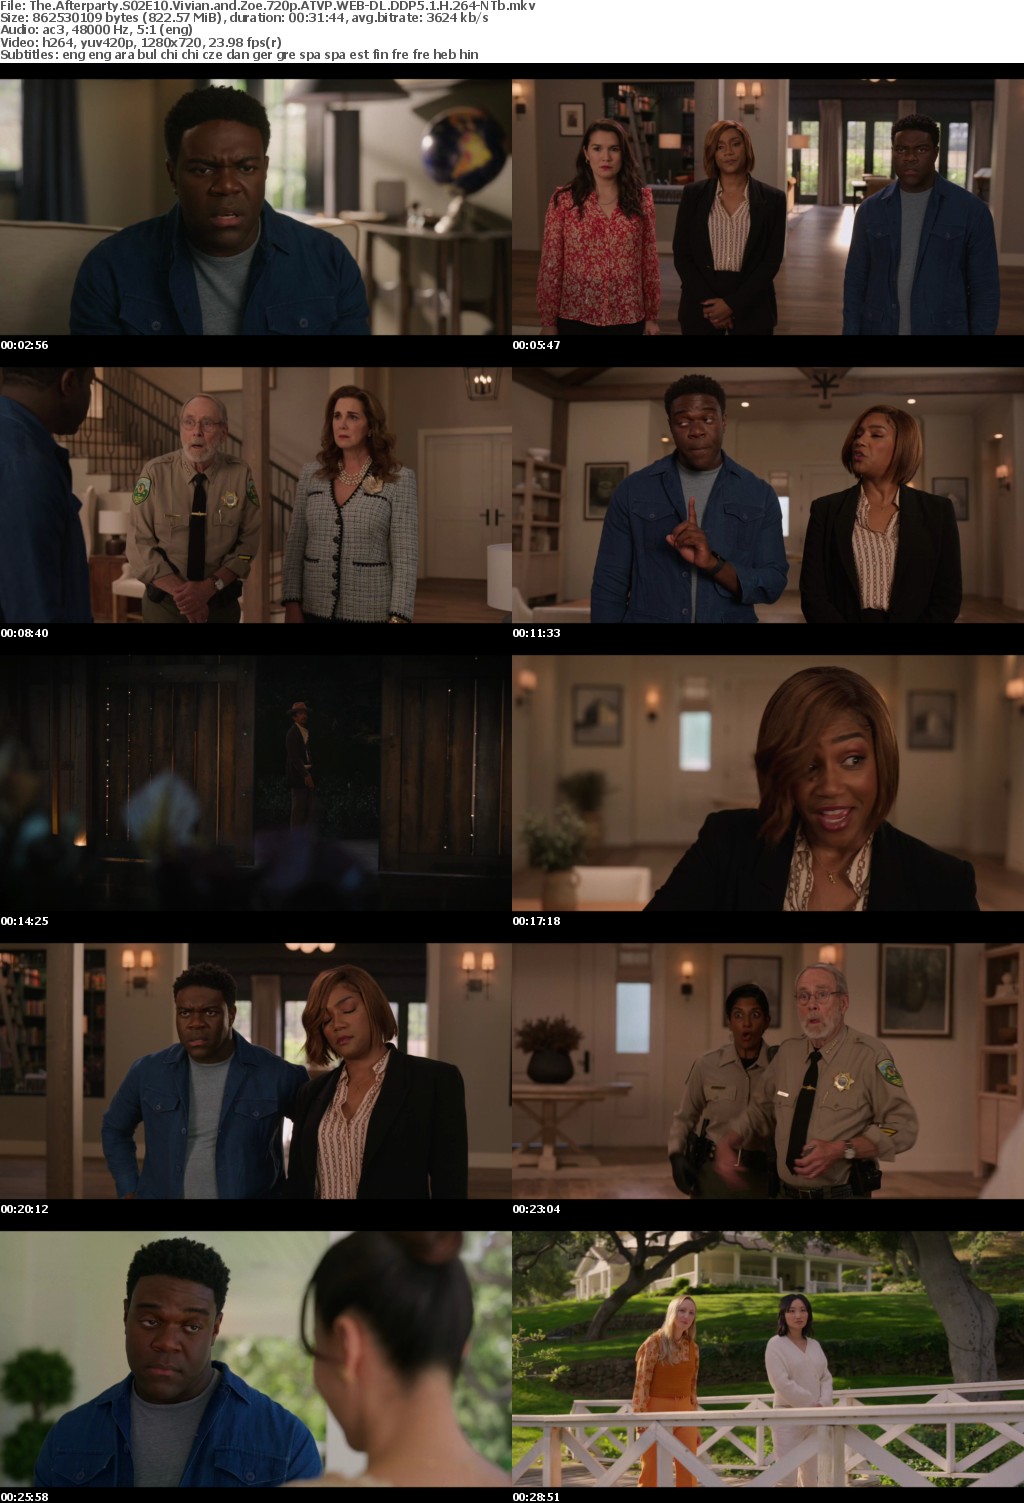 The Afterparty S02E10 Vivian and Zoe 720p ATVP WEB-DL DDP5 1 H 264-NTb